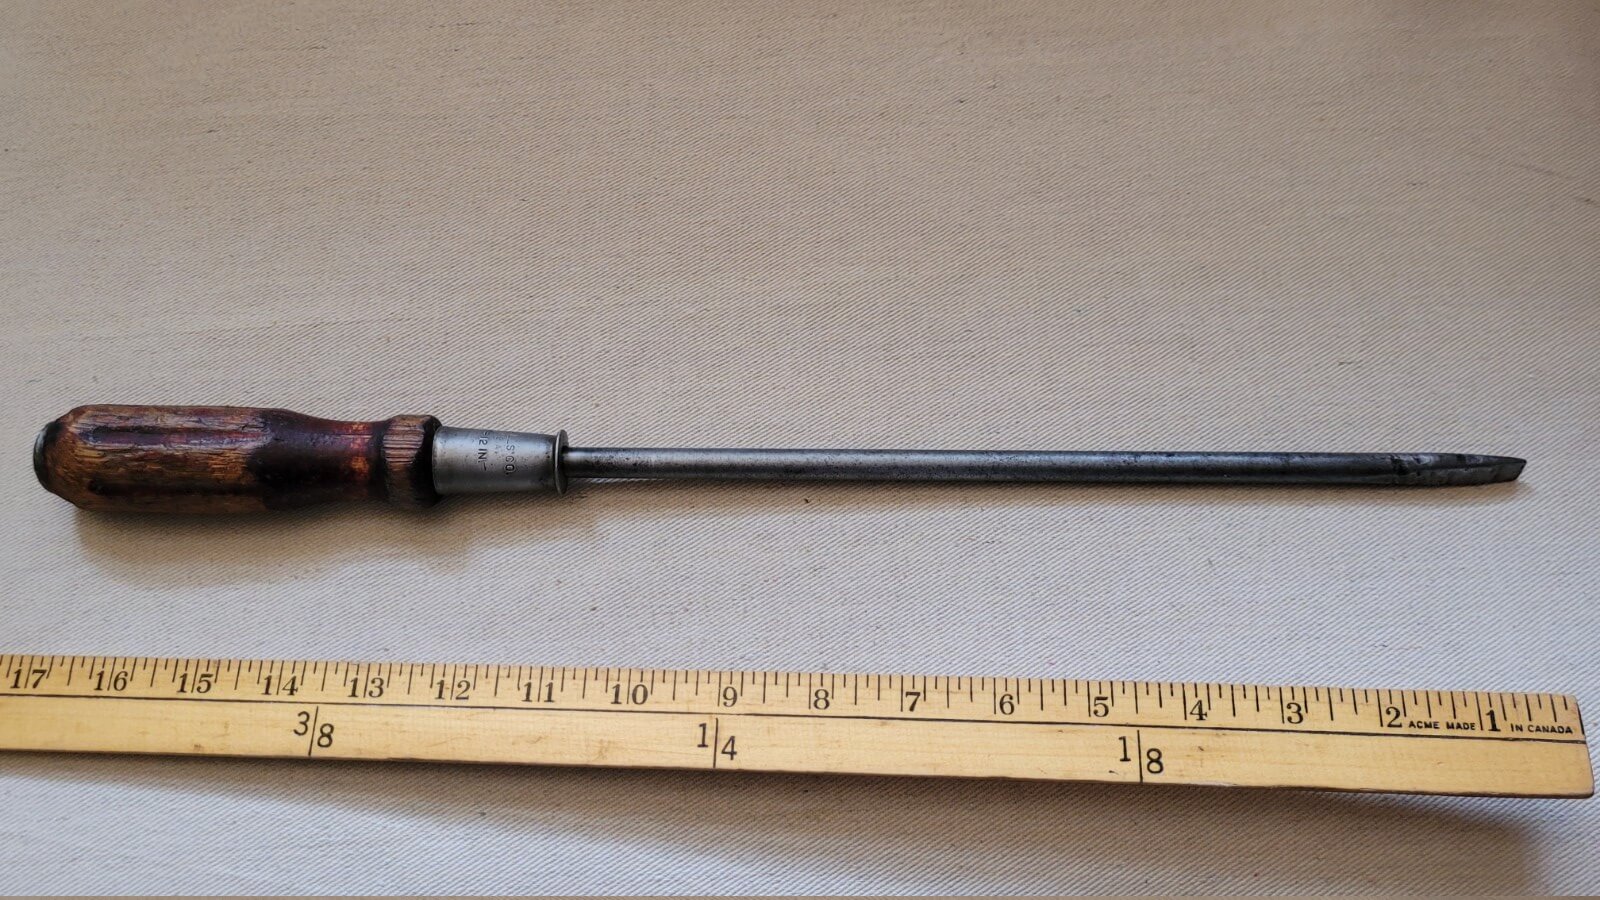 Rare Miller Falls No 676 Twelve Inches Flat Screwdriver with Wooden Handle - Vintage Made in USA Collectible Hand Tools